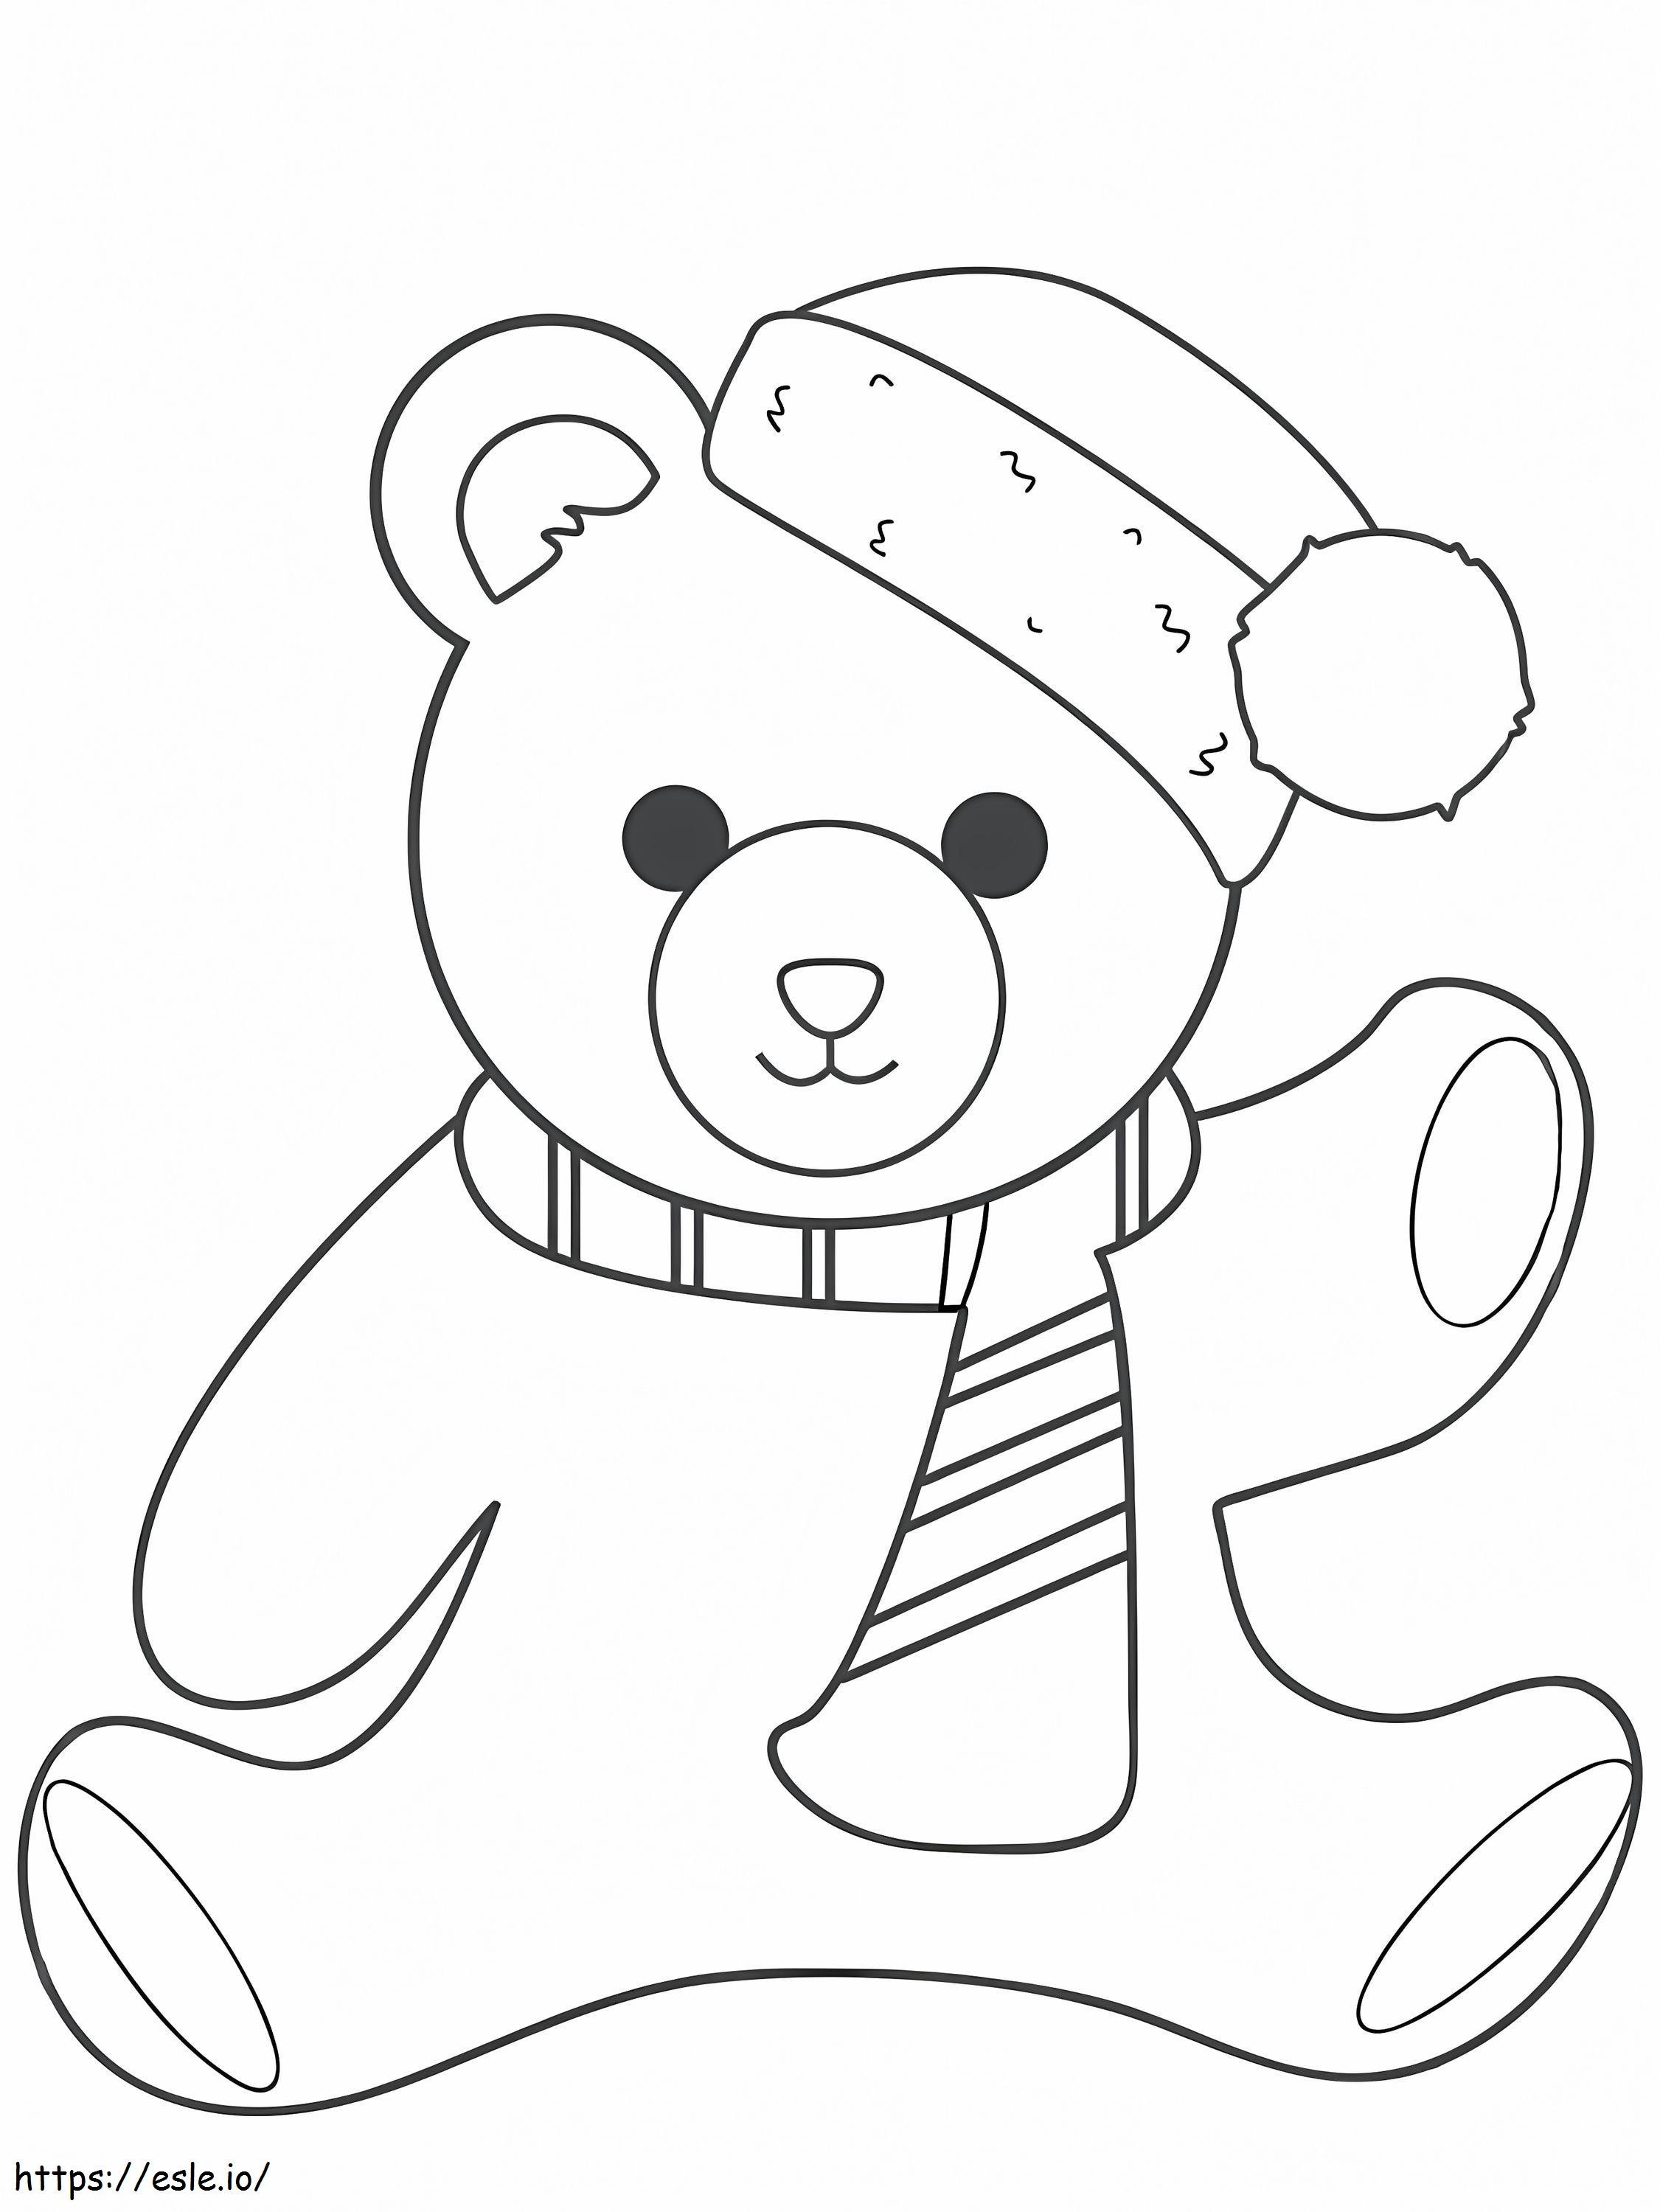 Warm Teddy Bear coloring page